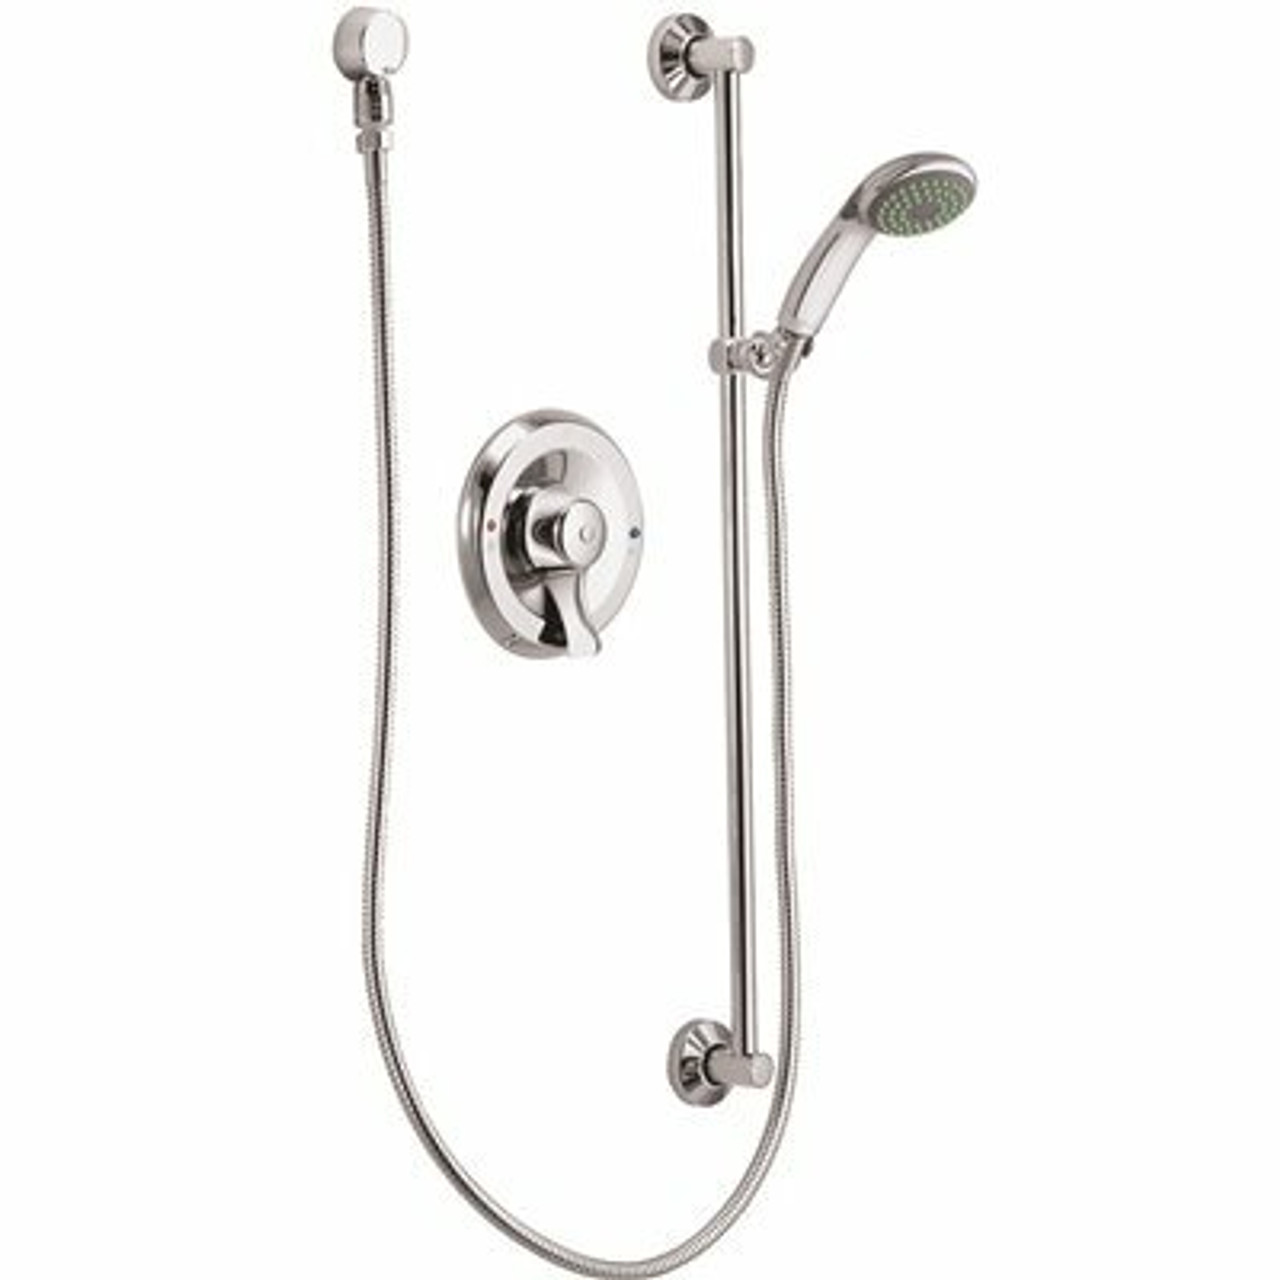 Moen Commercial Posi-Temp 1-Spray Handheld Shower Trim Kit Without Valve, 1.5 Gpm, Lever Handle In Chrome